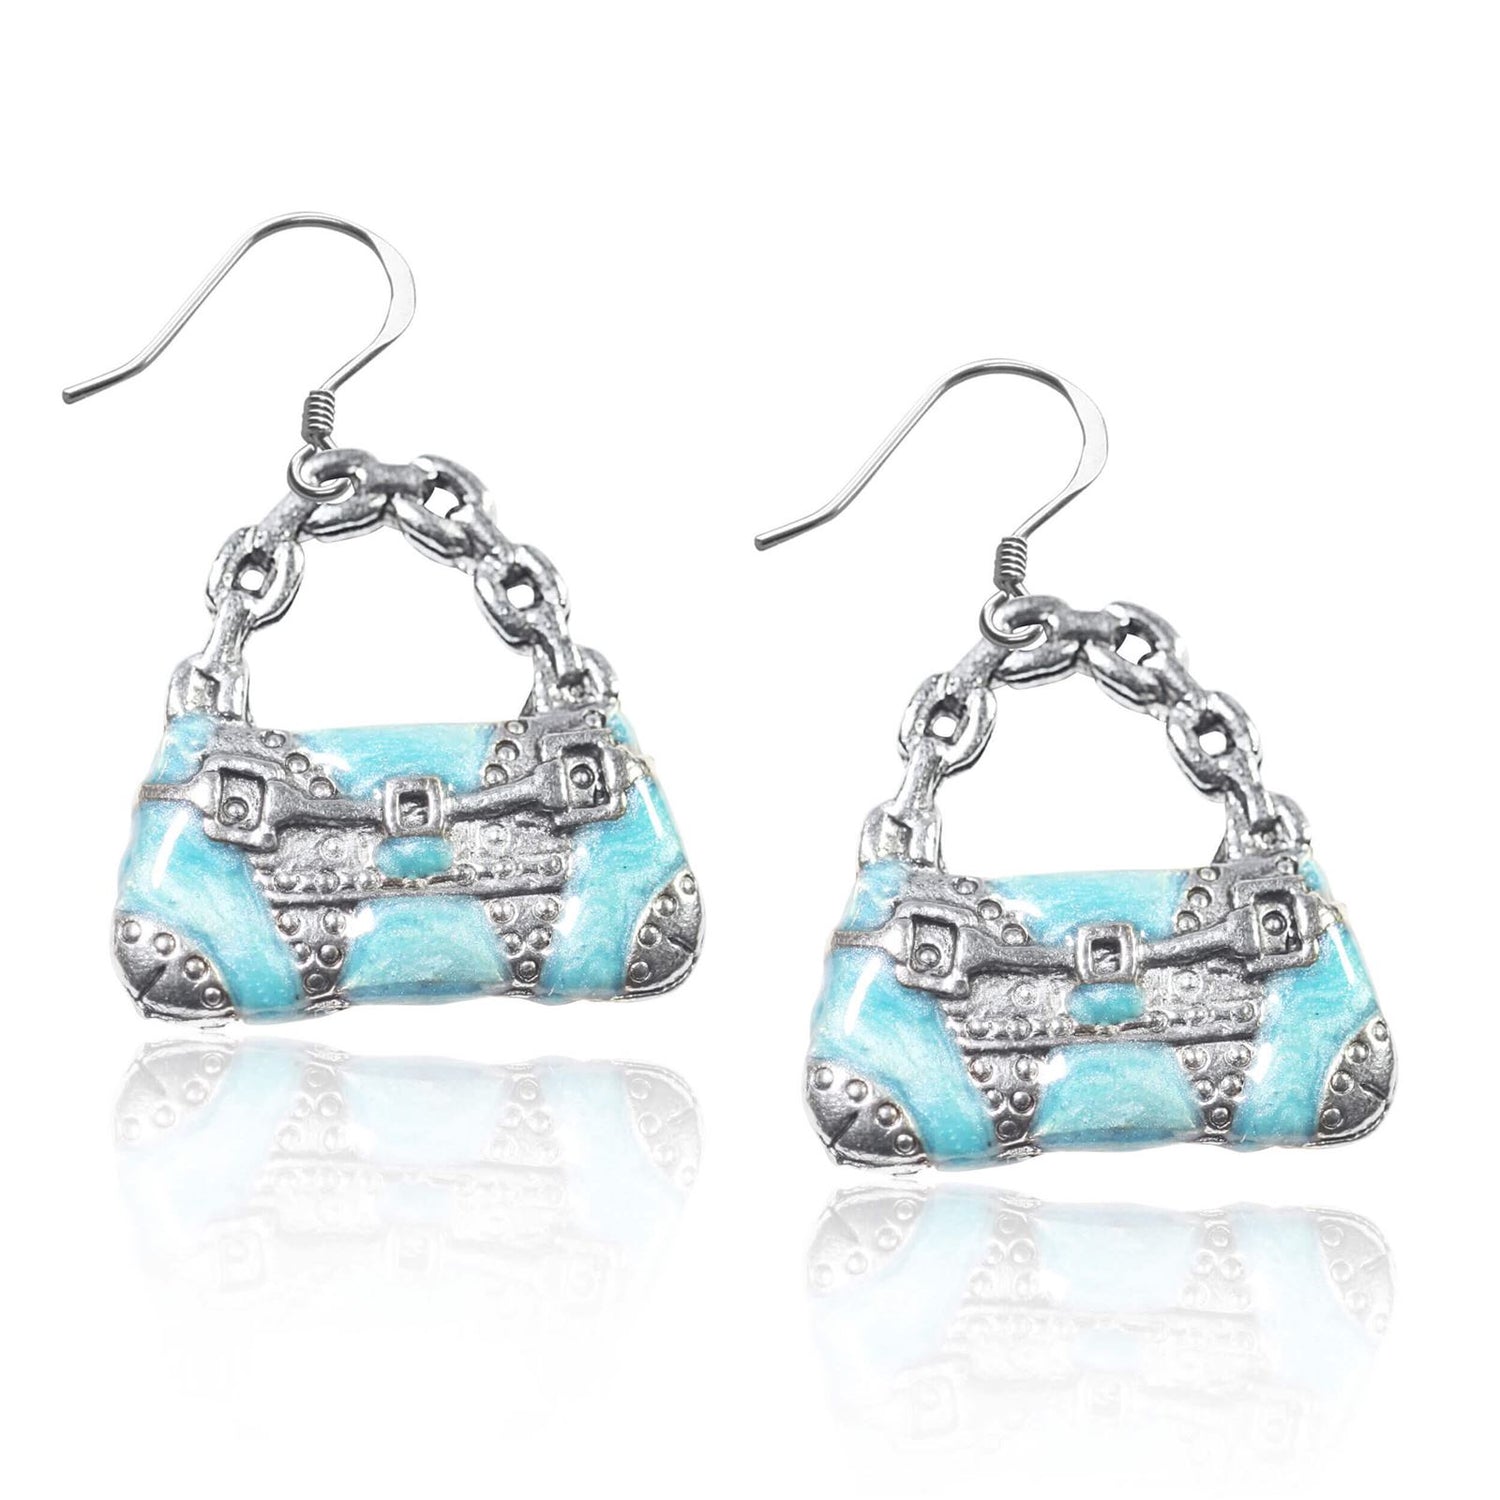 Whimsical Gifts | Retro Purse Charm Earrings in Silver Finish | Hobbies & Special Interests | Fashionista | Jewelry